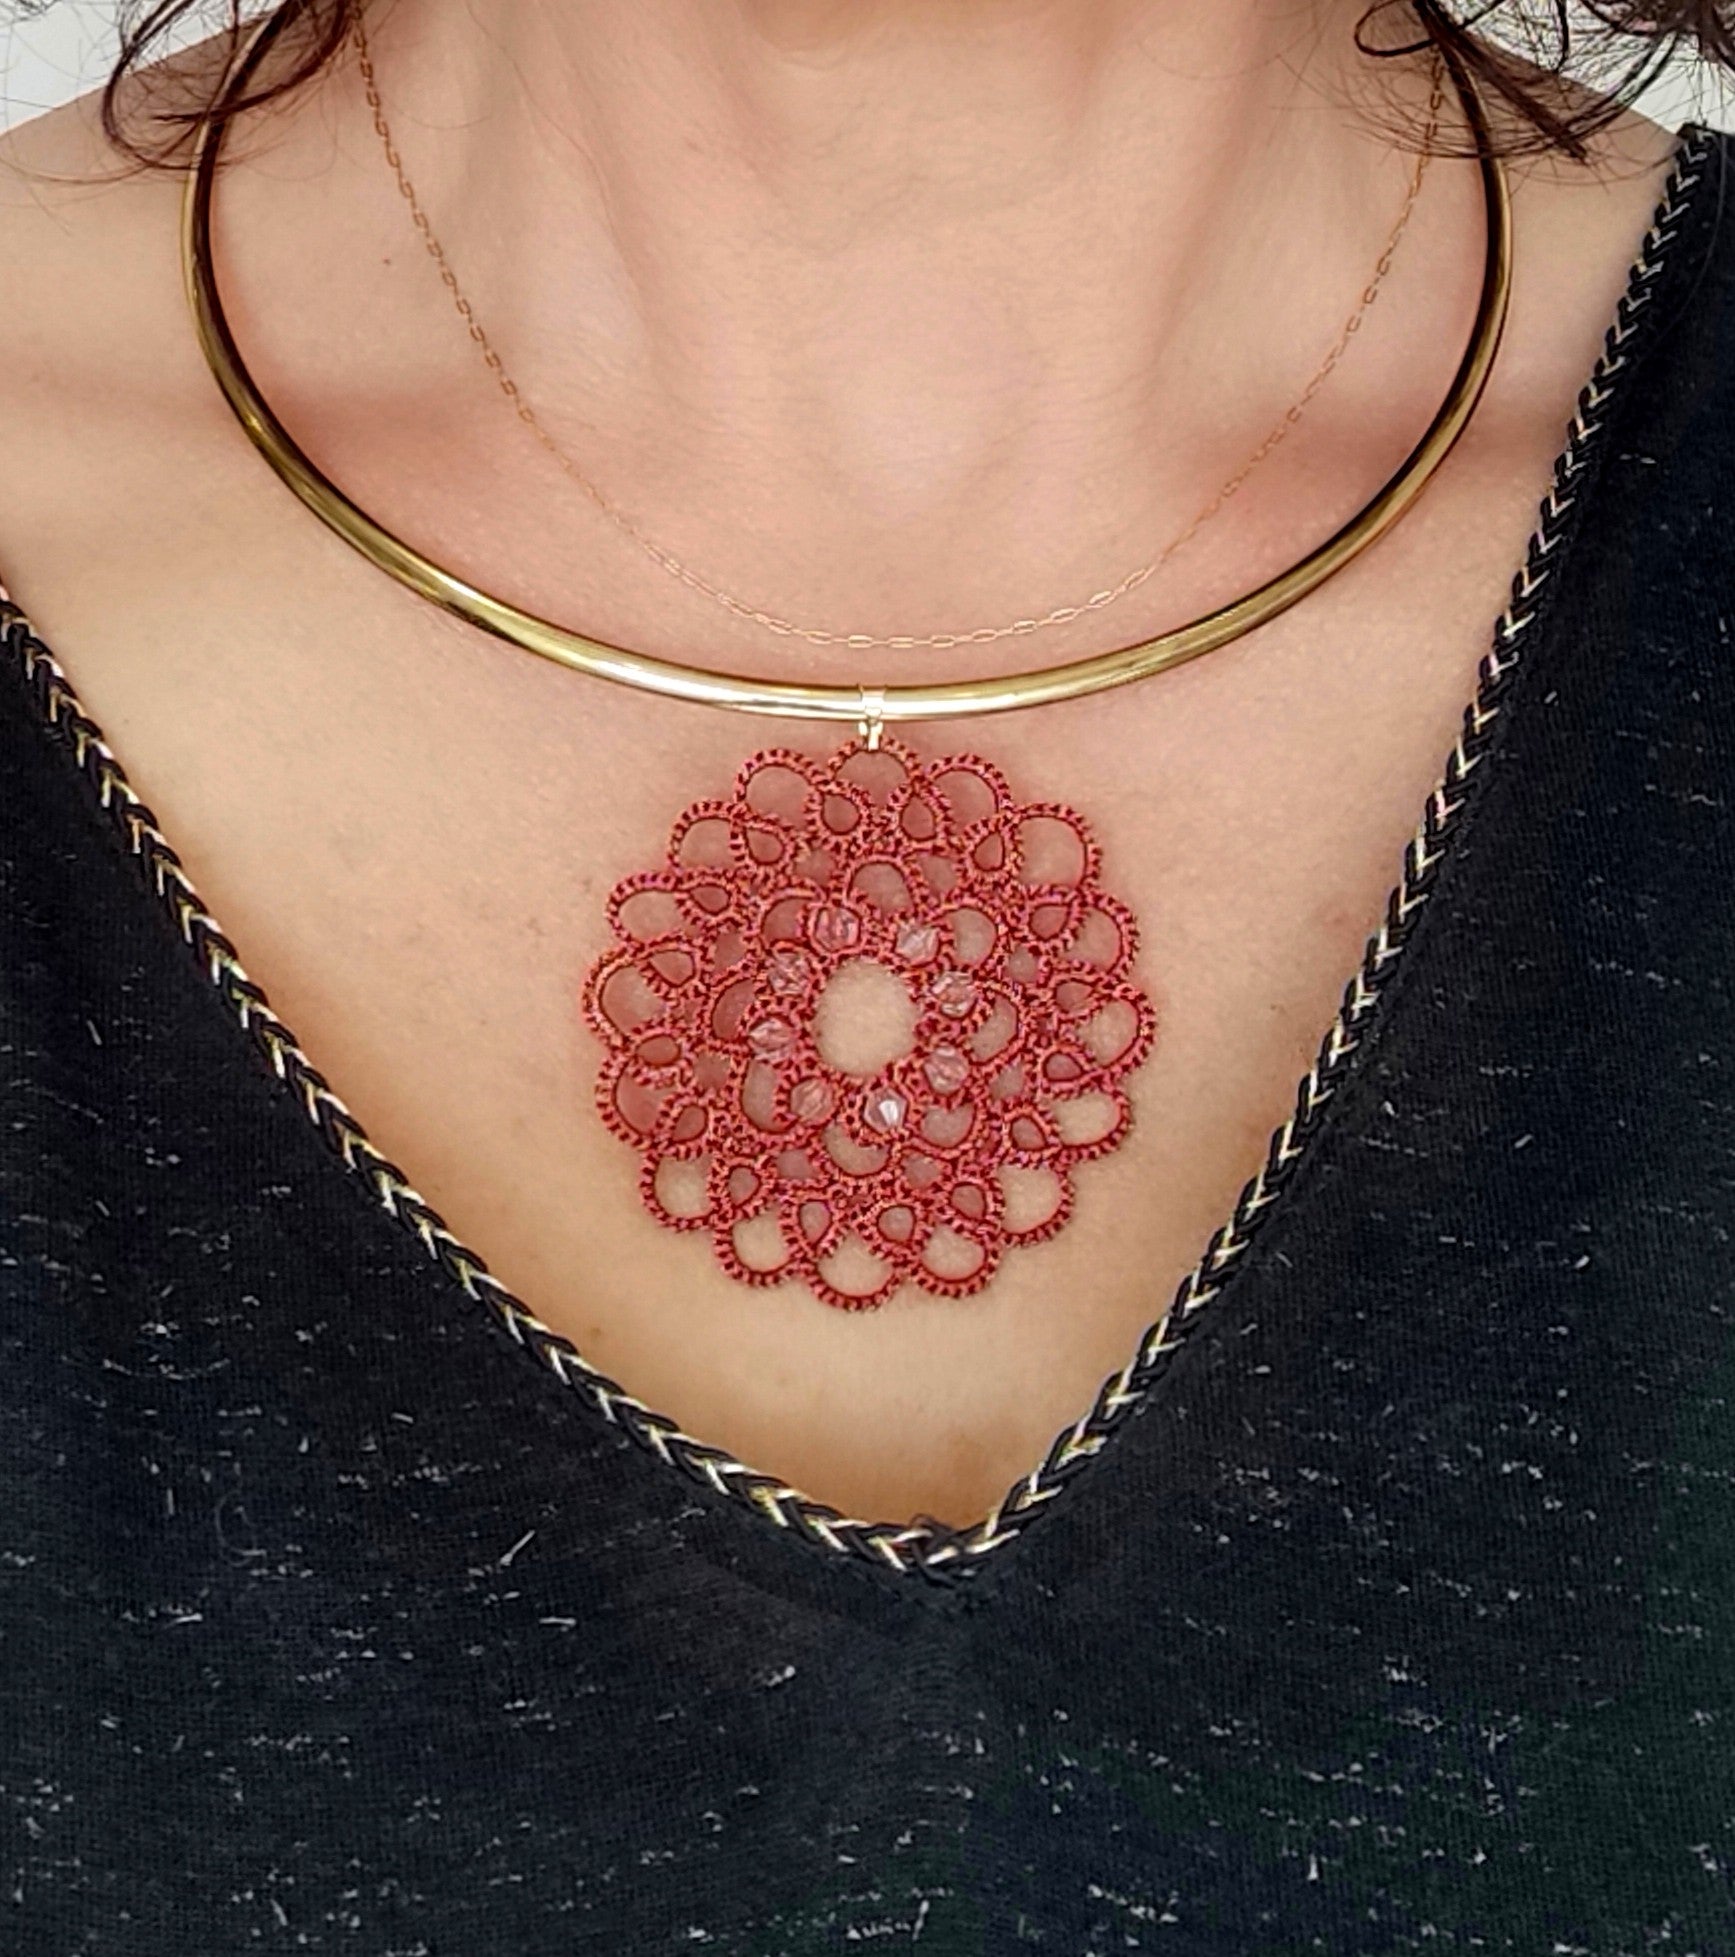 DAWN. Haute couture necklace made with the technique of tatting.